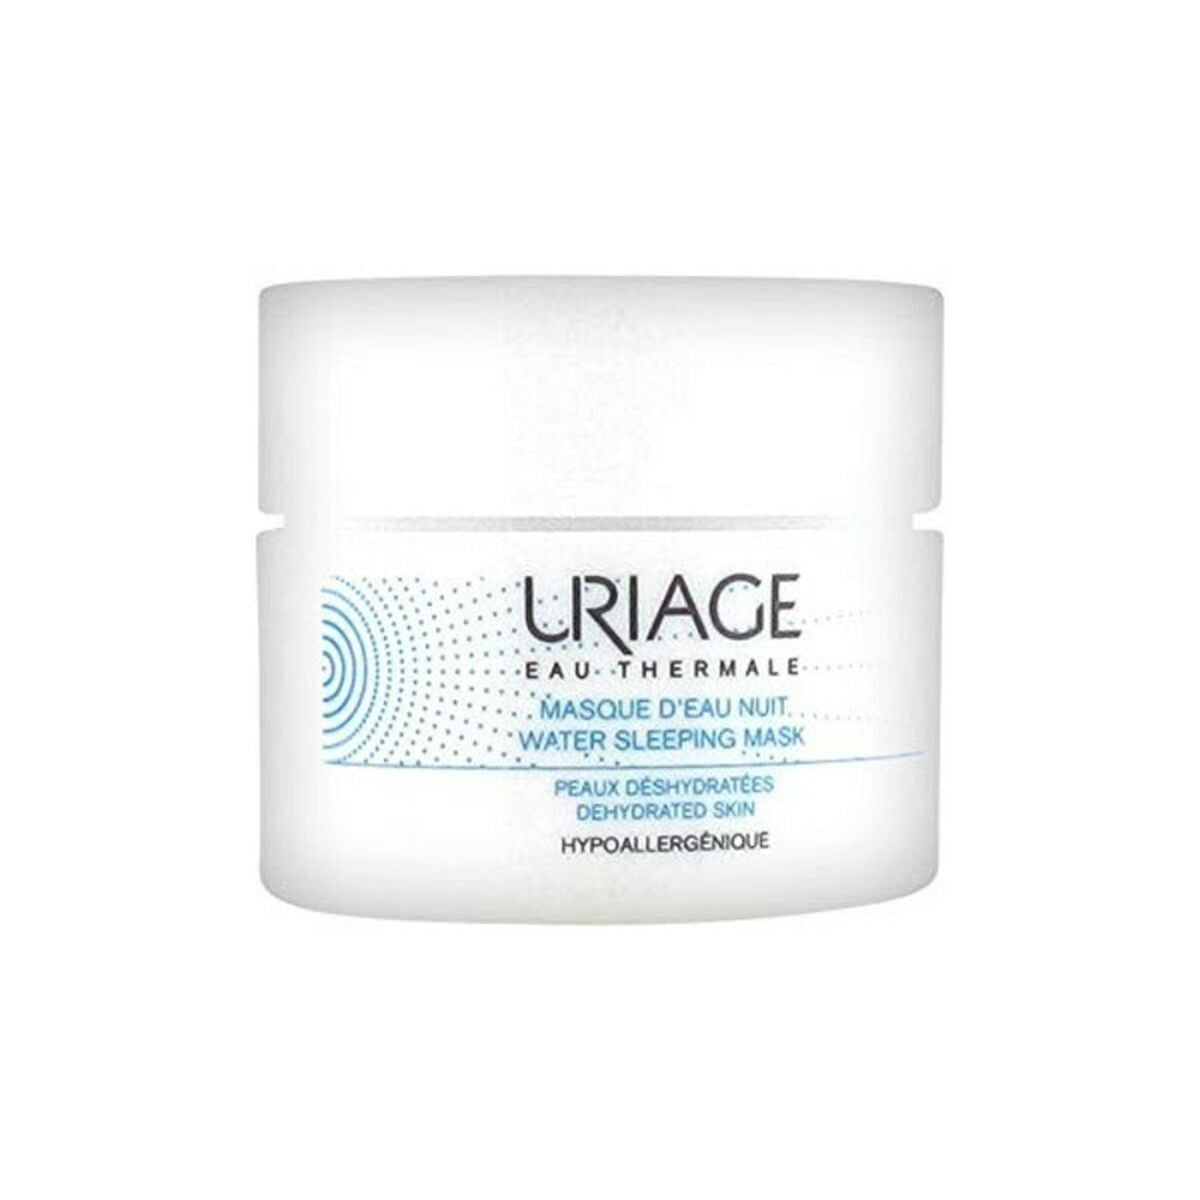 Facial Mask Eau Thermale Water Sleeping Uriage Eau Thermale (50 ml) 50 ml | Uriage | Aylal Beauty